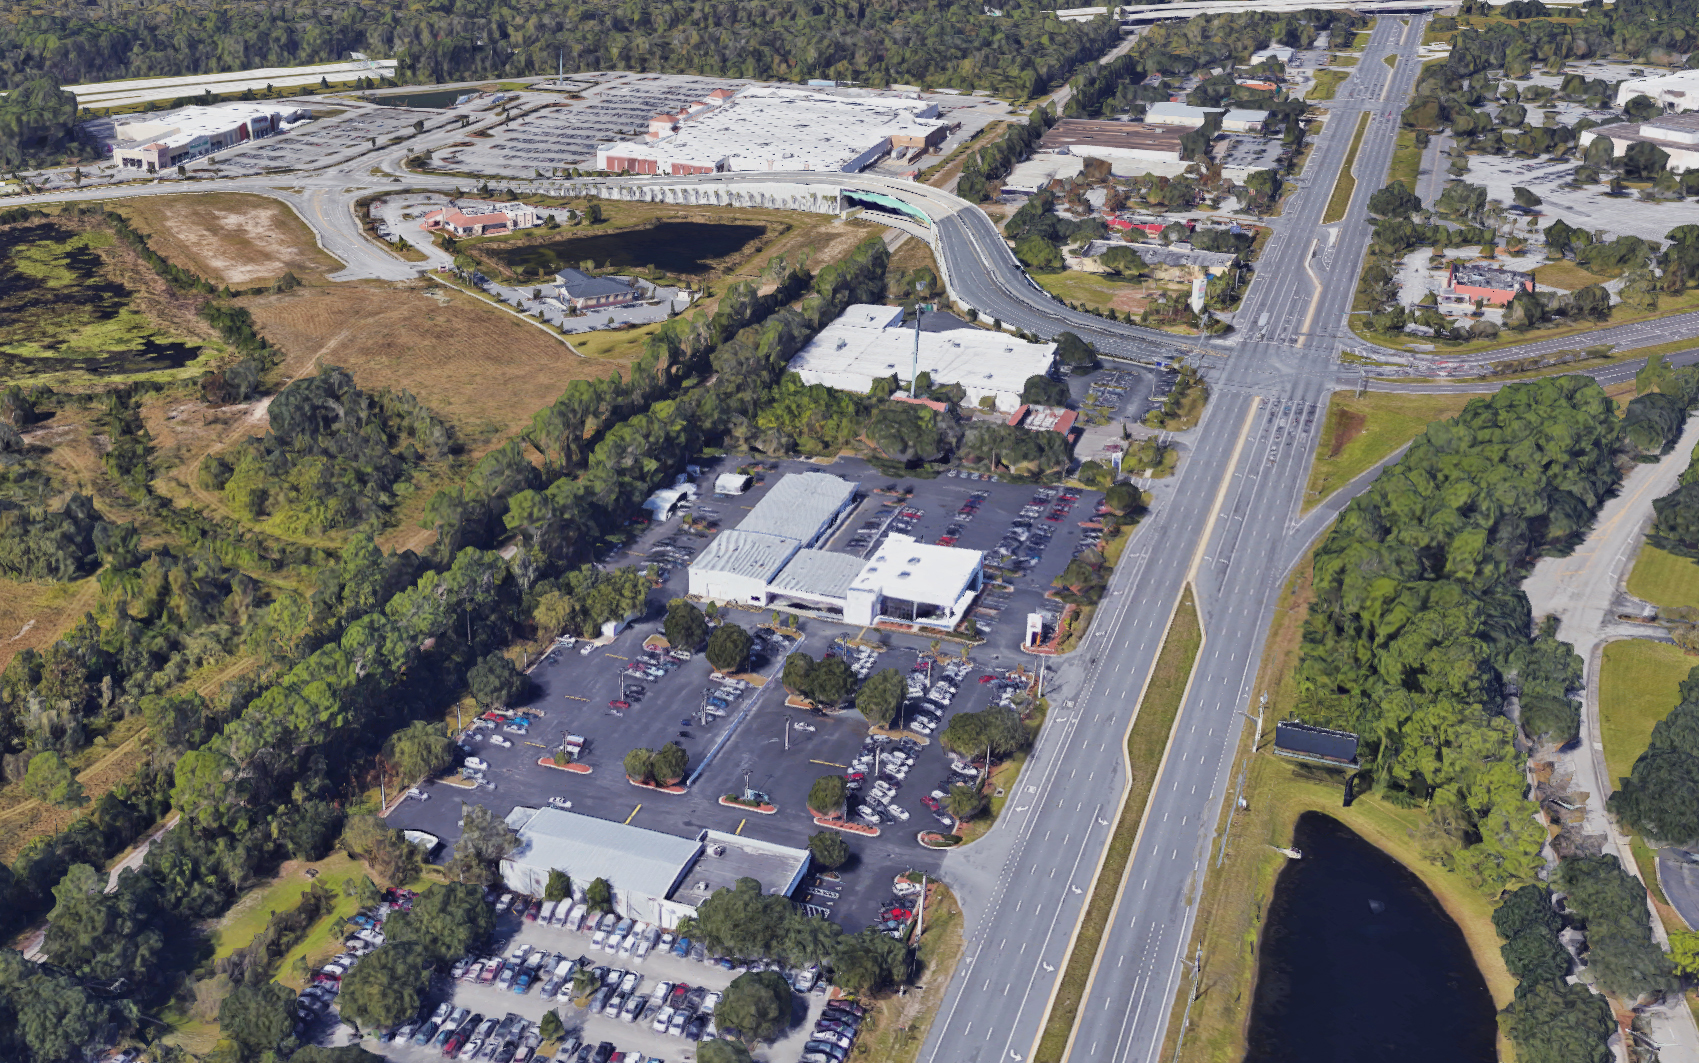 Greenway Ford in Orlando is the buyer of the former car dealership along Philips Highway south of The Avenues mall.